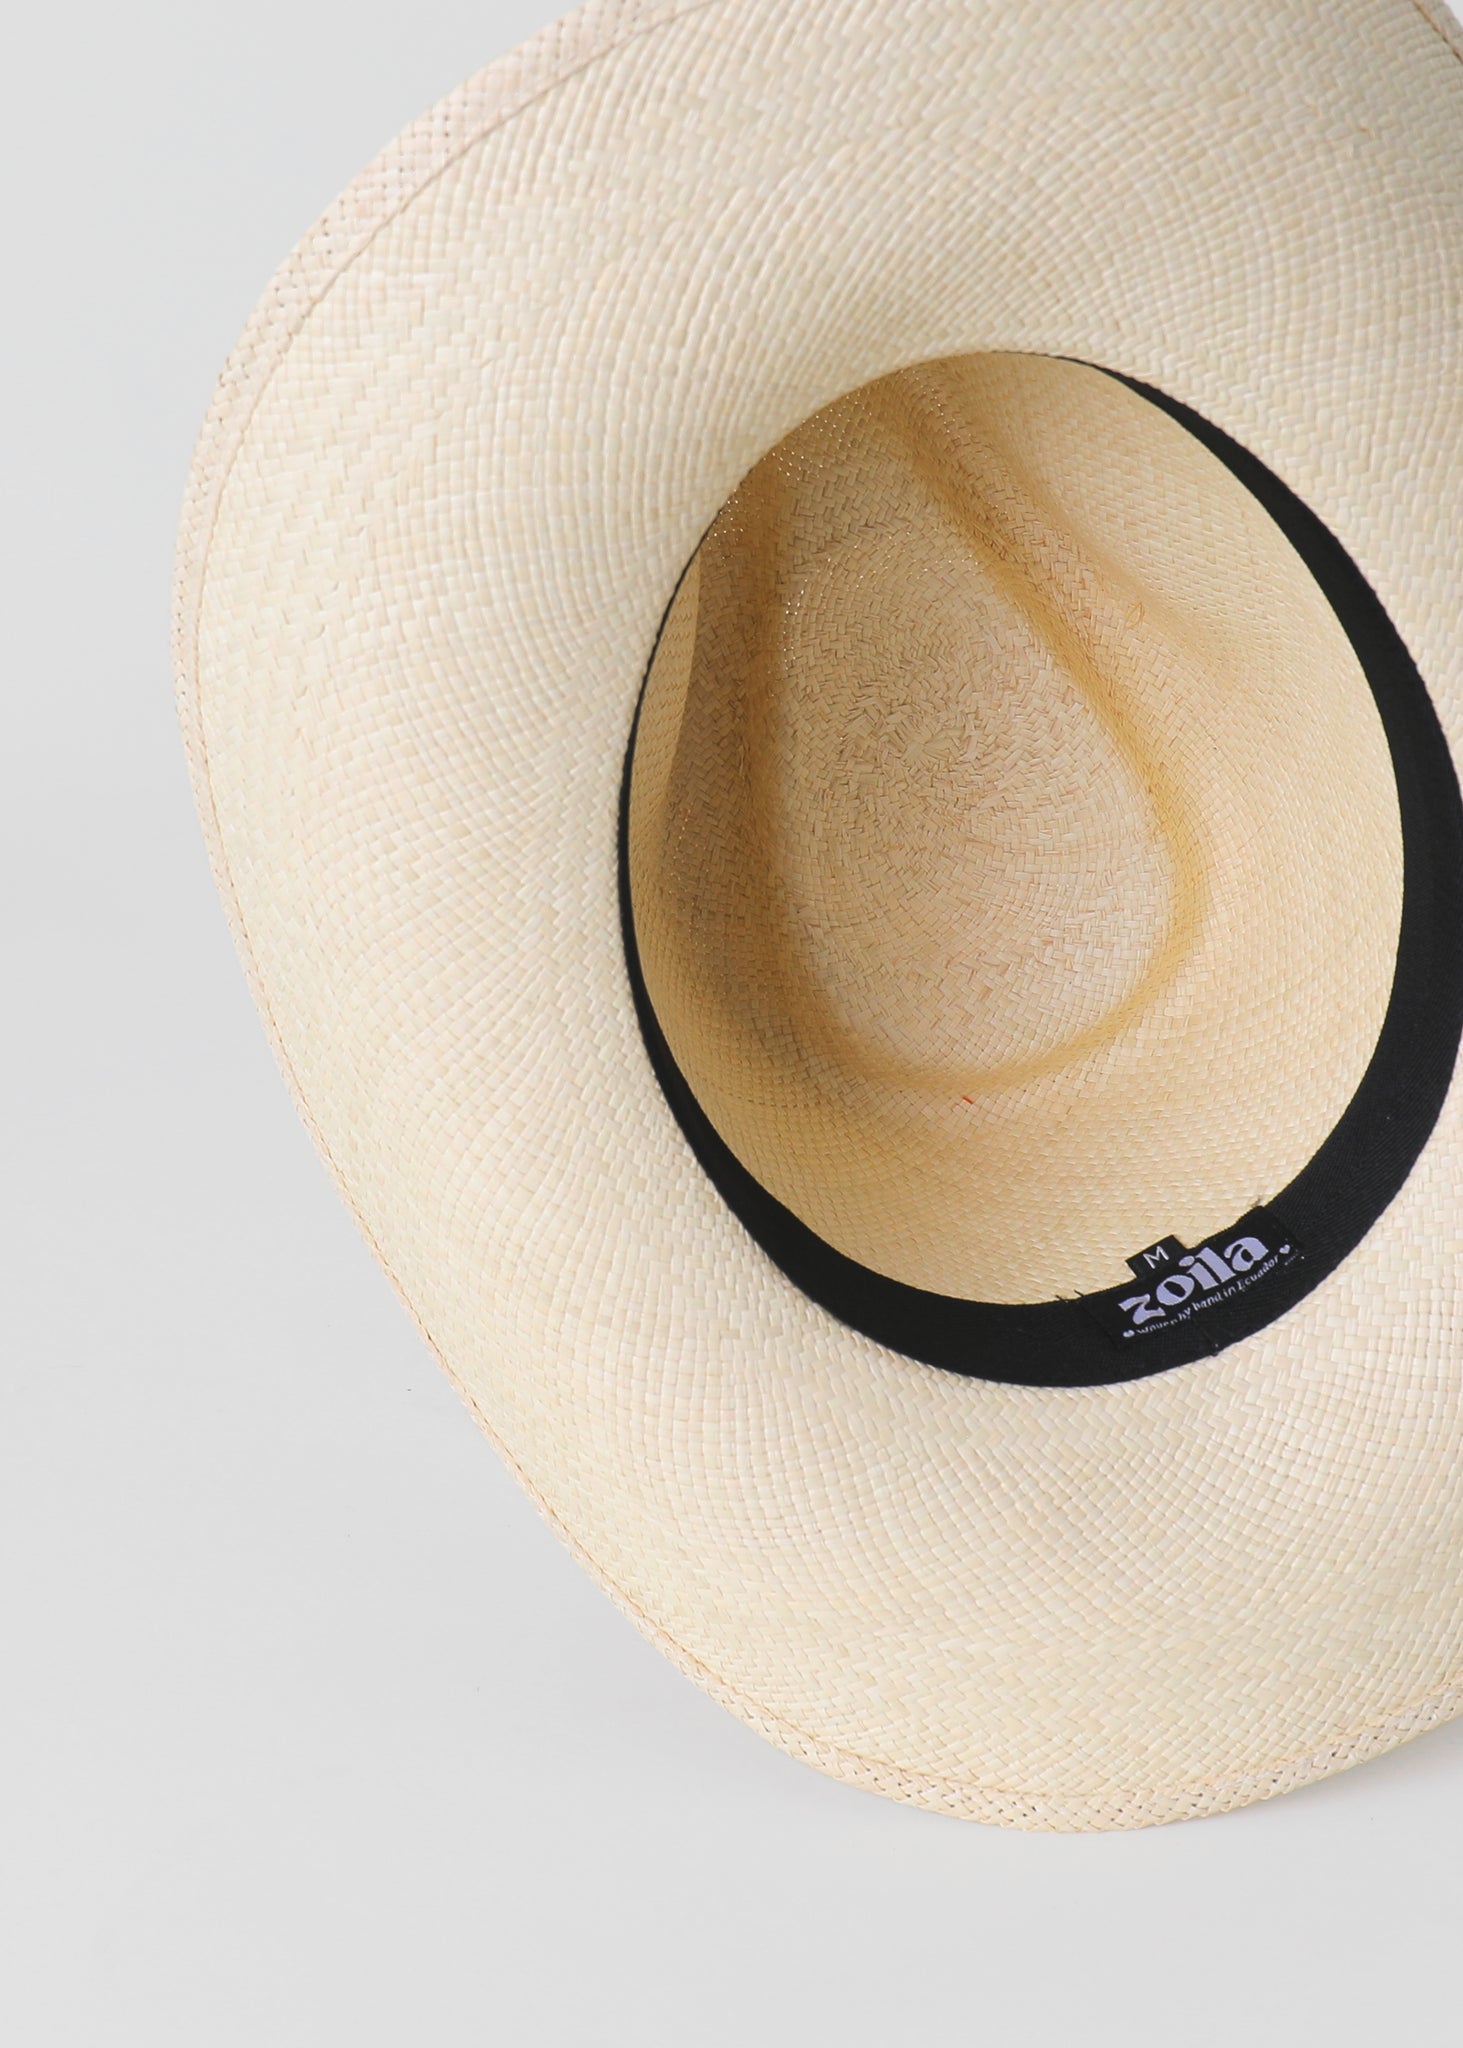 straw cowboy hats for women